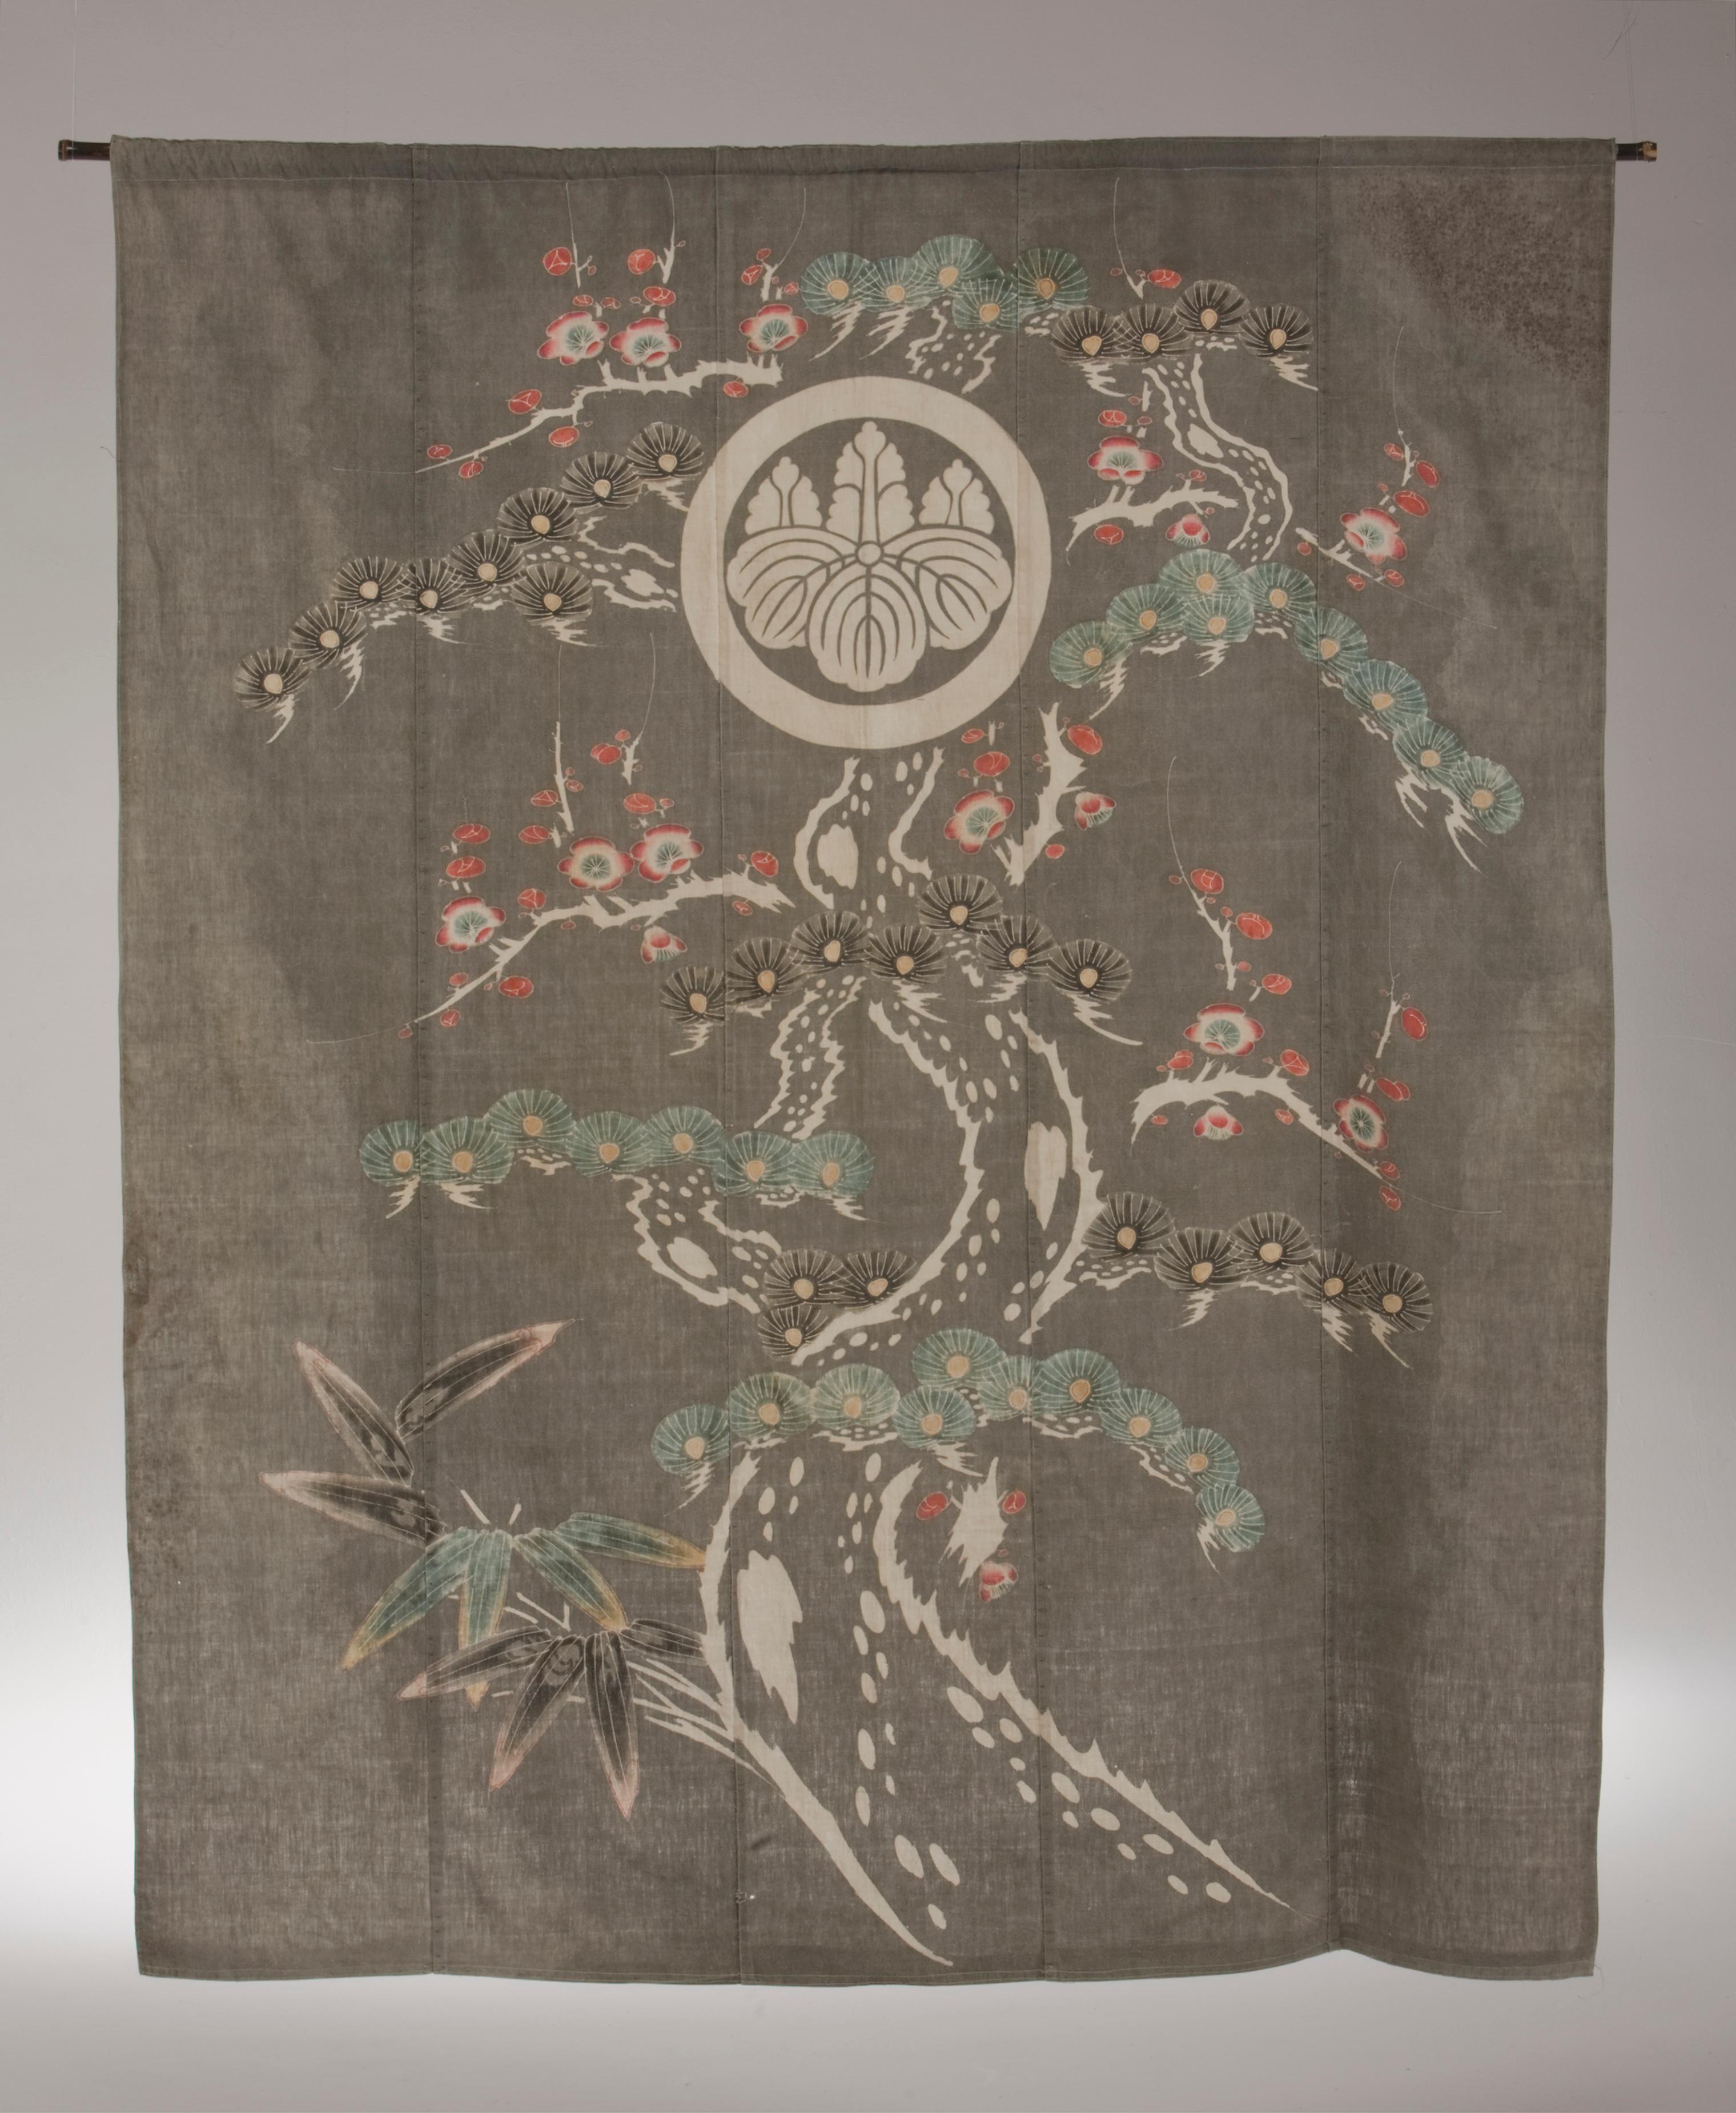 Antique Japanese Futon Cover featuring Pine with Plum Blossoms and Bamboo

Unusual Background-Color of Gray with Plum Blossoms, Pine, and Bamboo
Futon Cover Center is the Family Crest (Mon).
Cotton Paste Resist, Tsutsugaki
Tsutsugaki is a